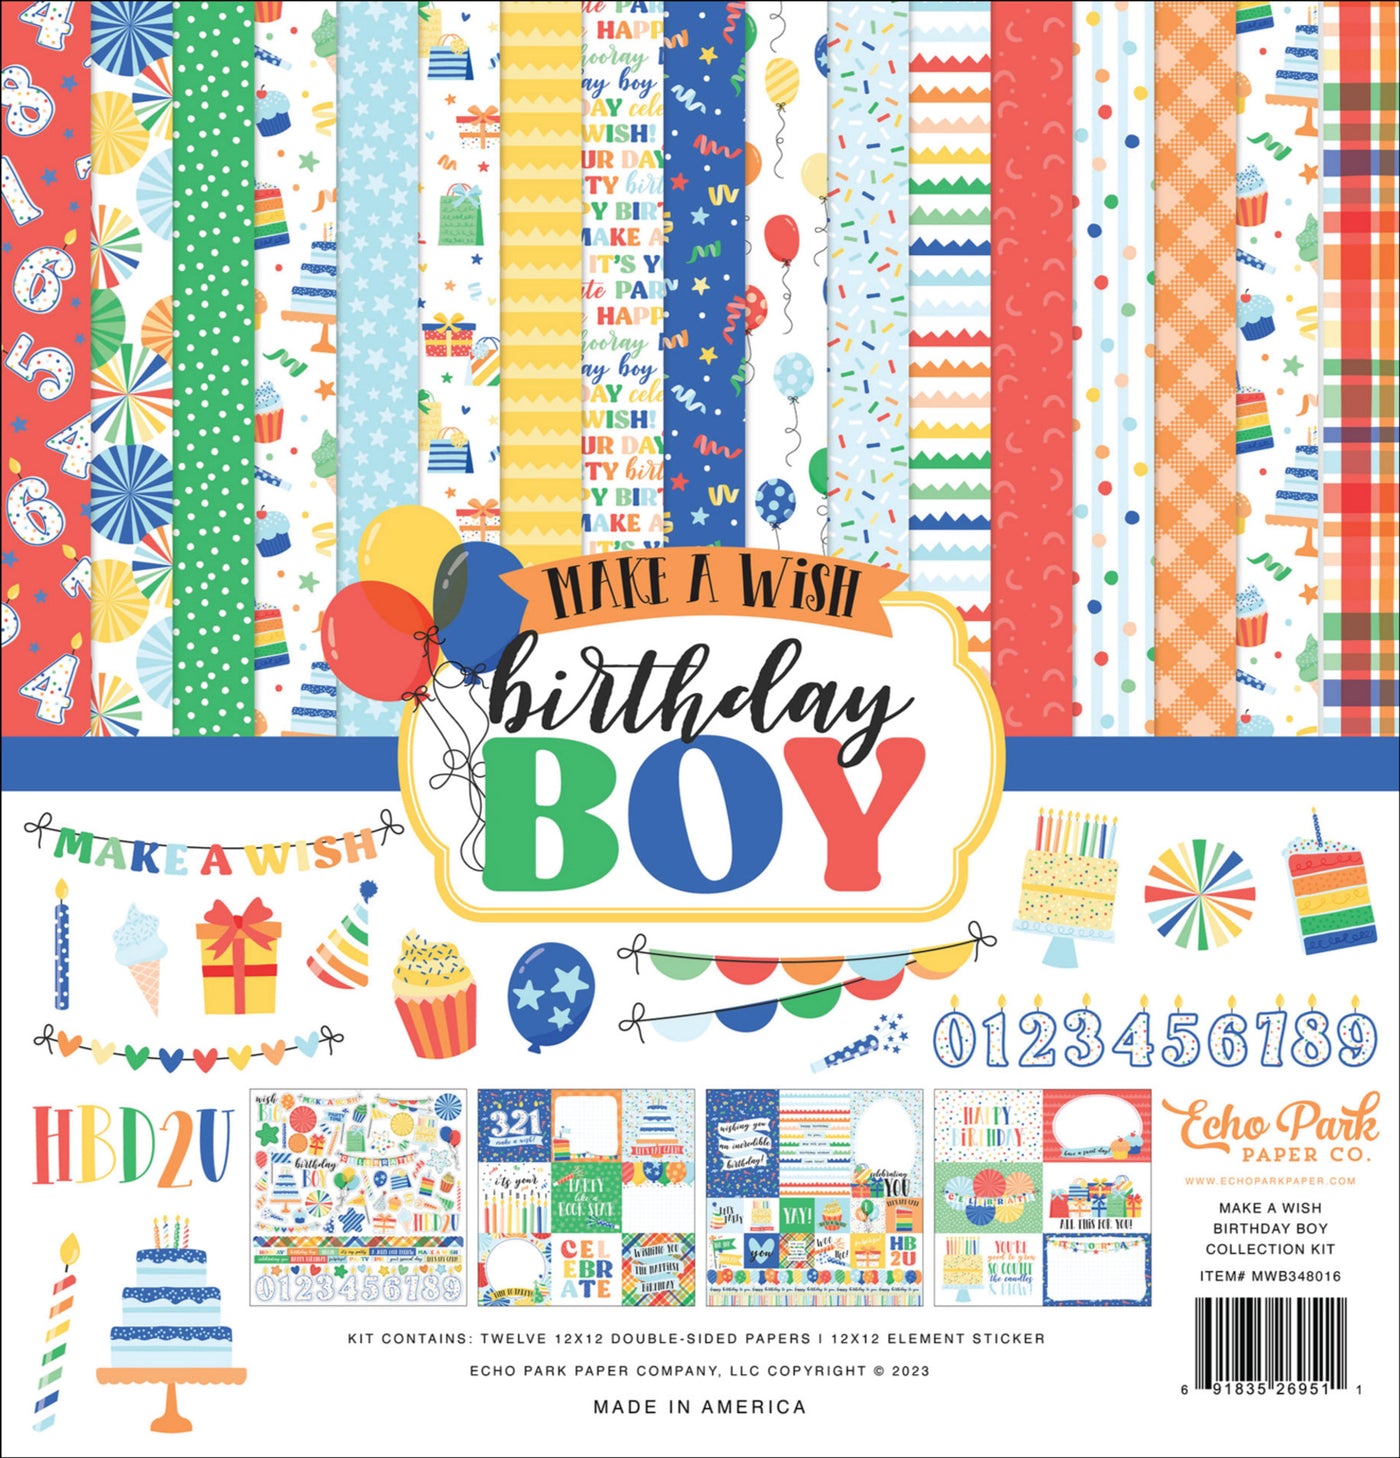 Twelve double-sided papers with party colors and themes focused on a boy's birthday. 12x12 inch textured cardstock; includes Element Sticker Sheet.